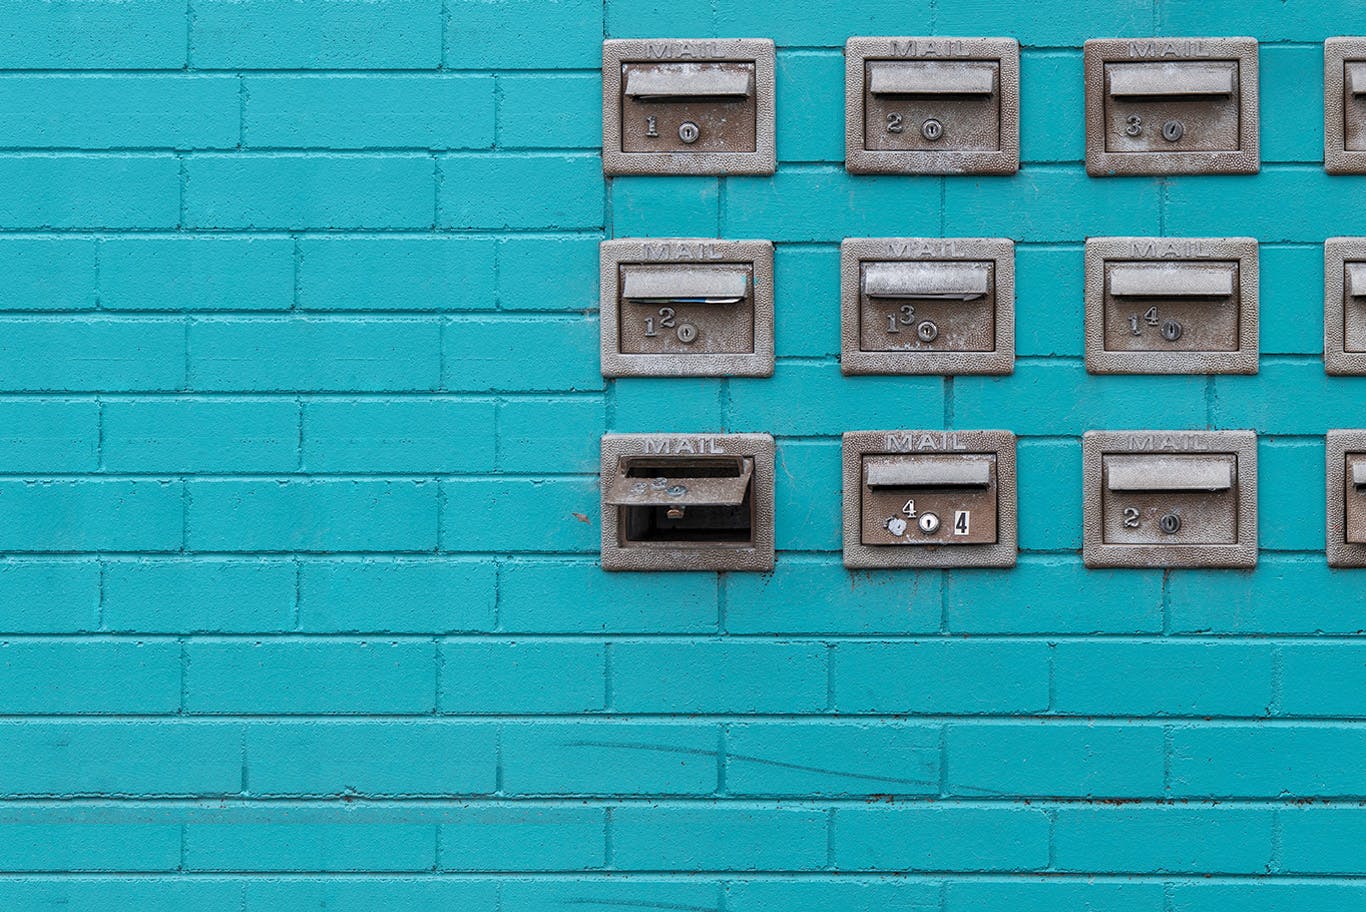 Mail boxes on teal brick wall